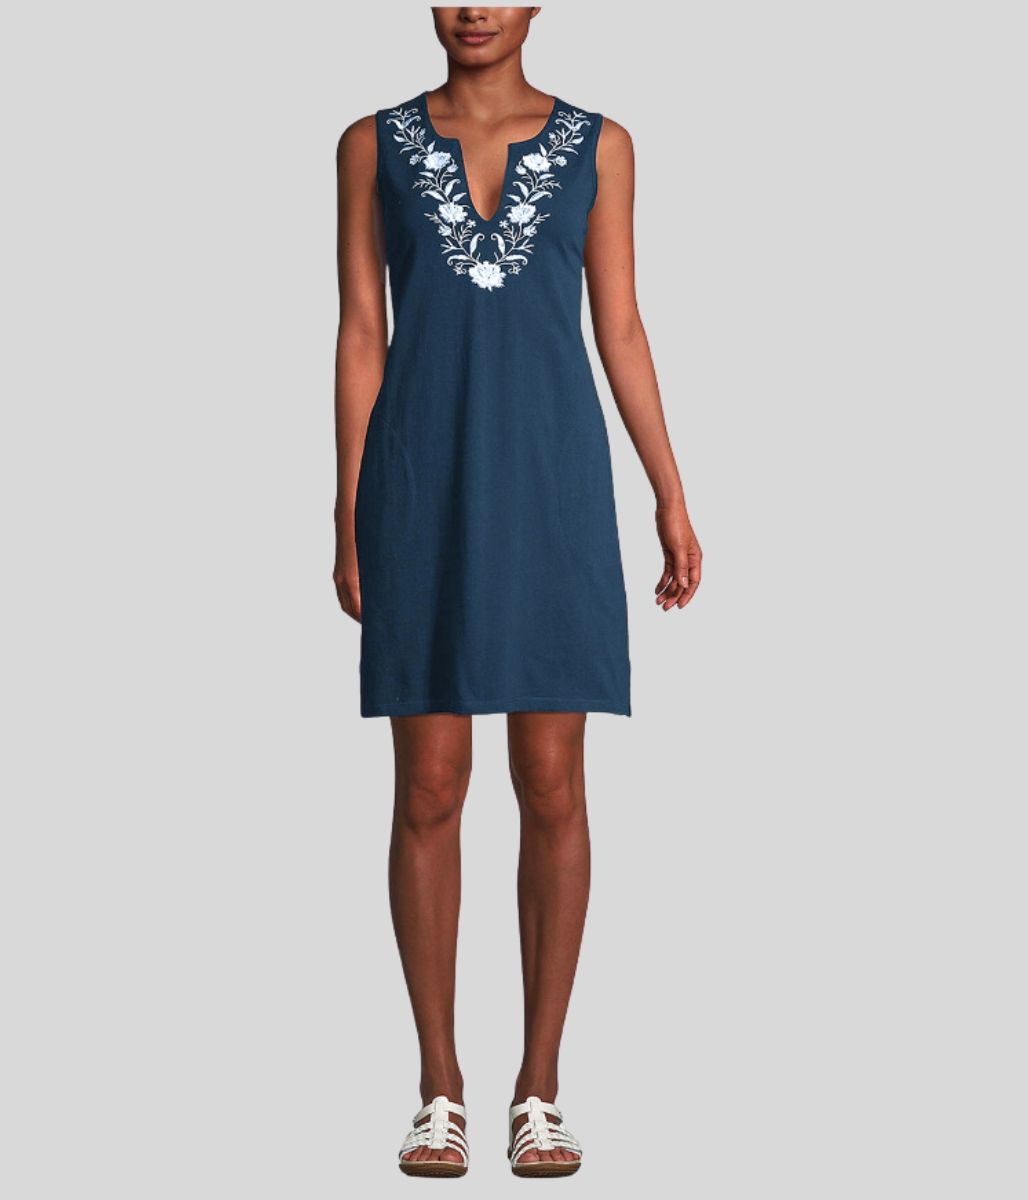 Navy Embroidered Tunic Dress  Size S (10/12)